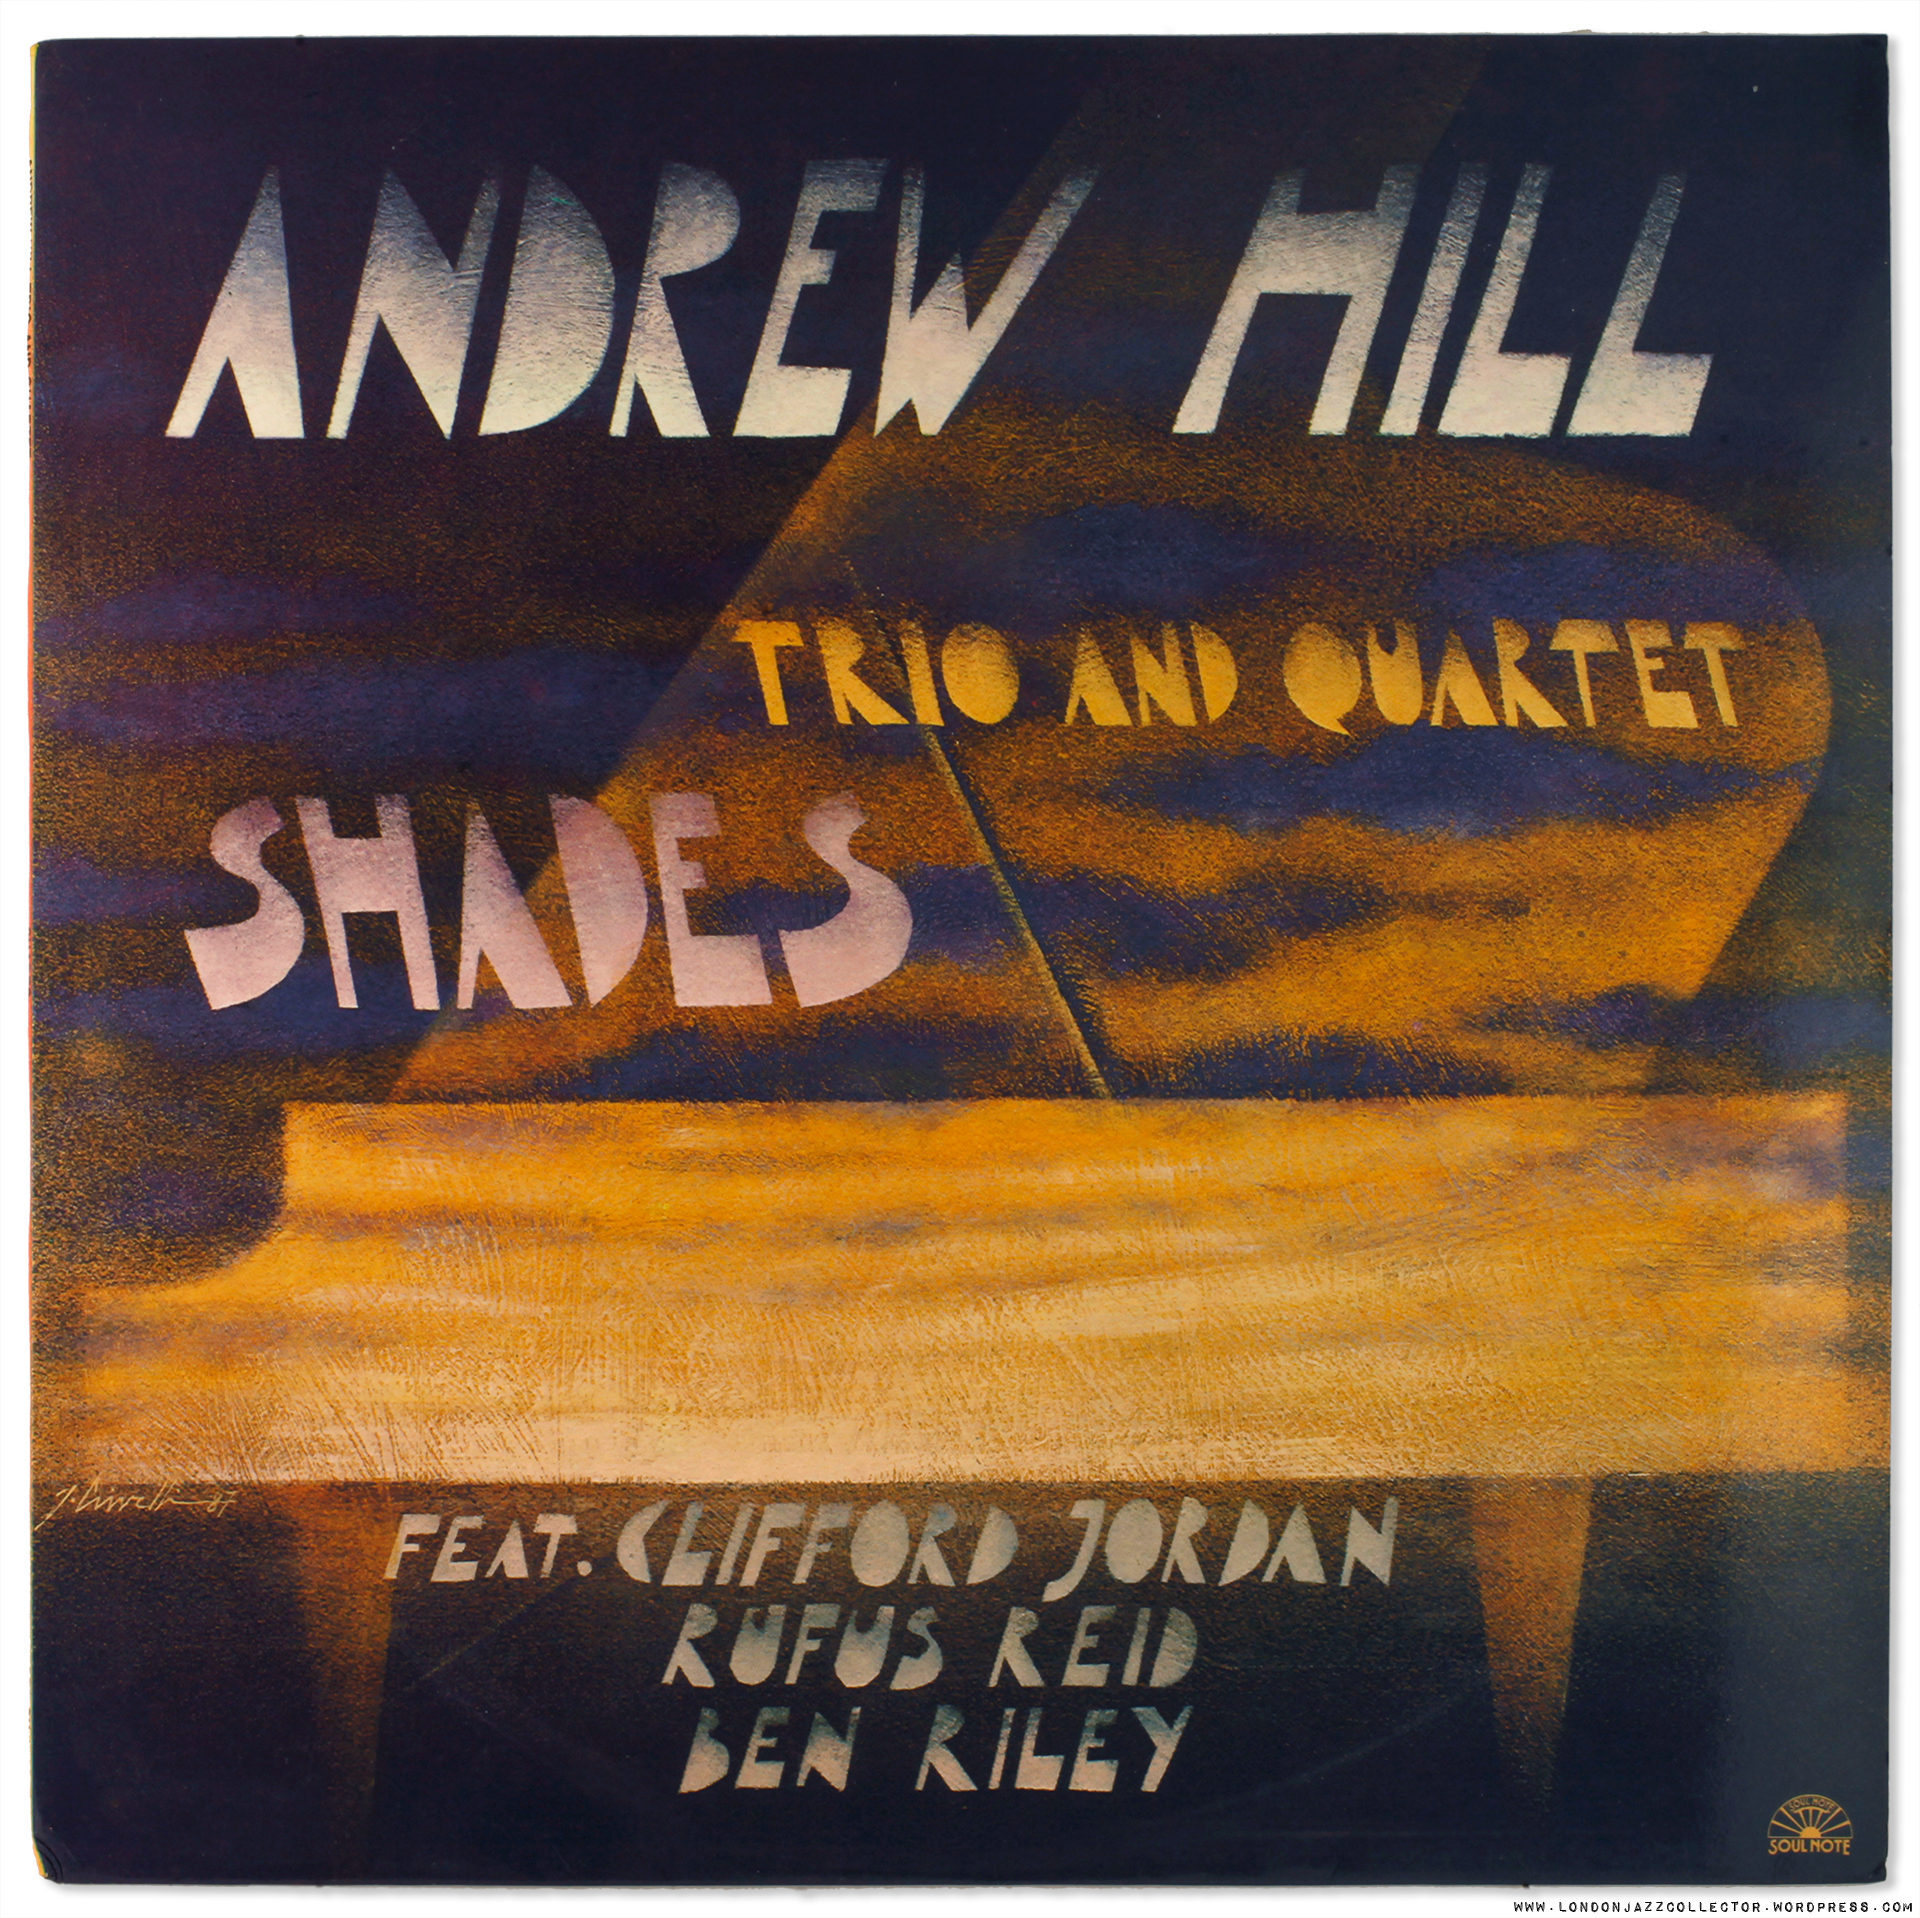 andrew-hill-shades-soul-note-cover-1920p